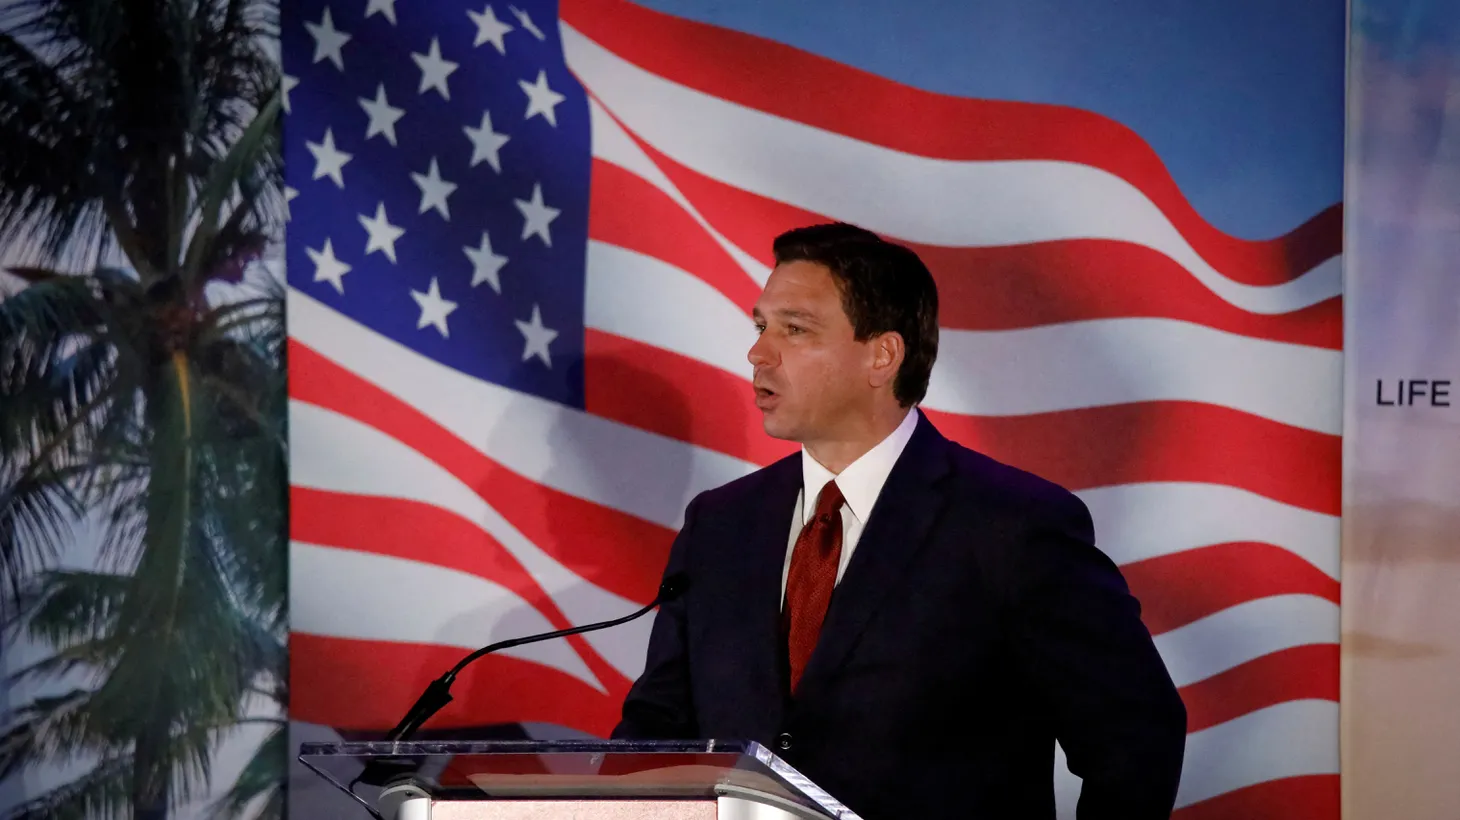 Florida Governor Ron DeSantis speaks during the Florida Family Policy Council Annual Dinner Gala, in Orlando, Florida, U.S., May 20, 2023.